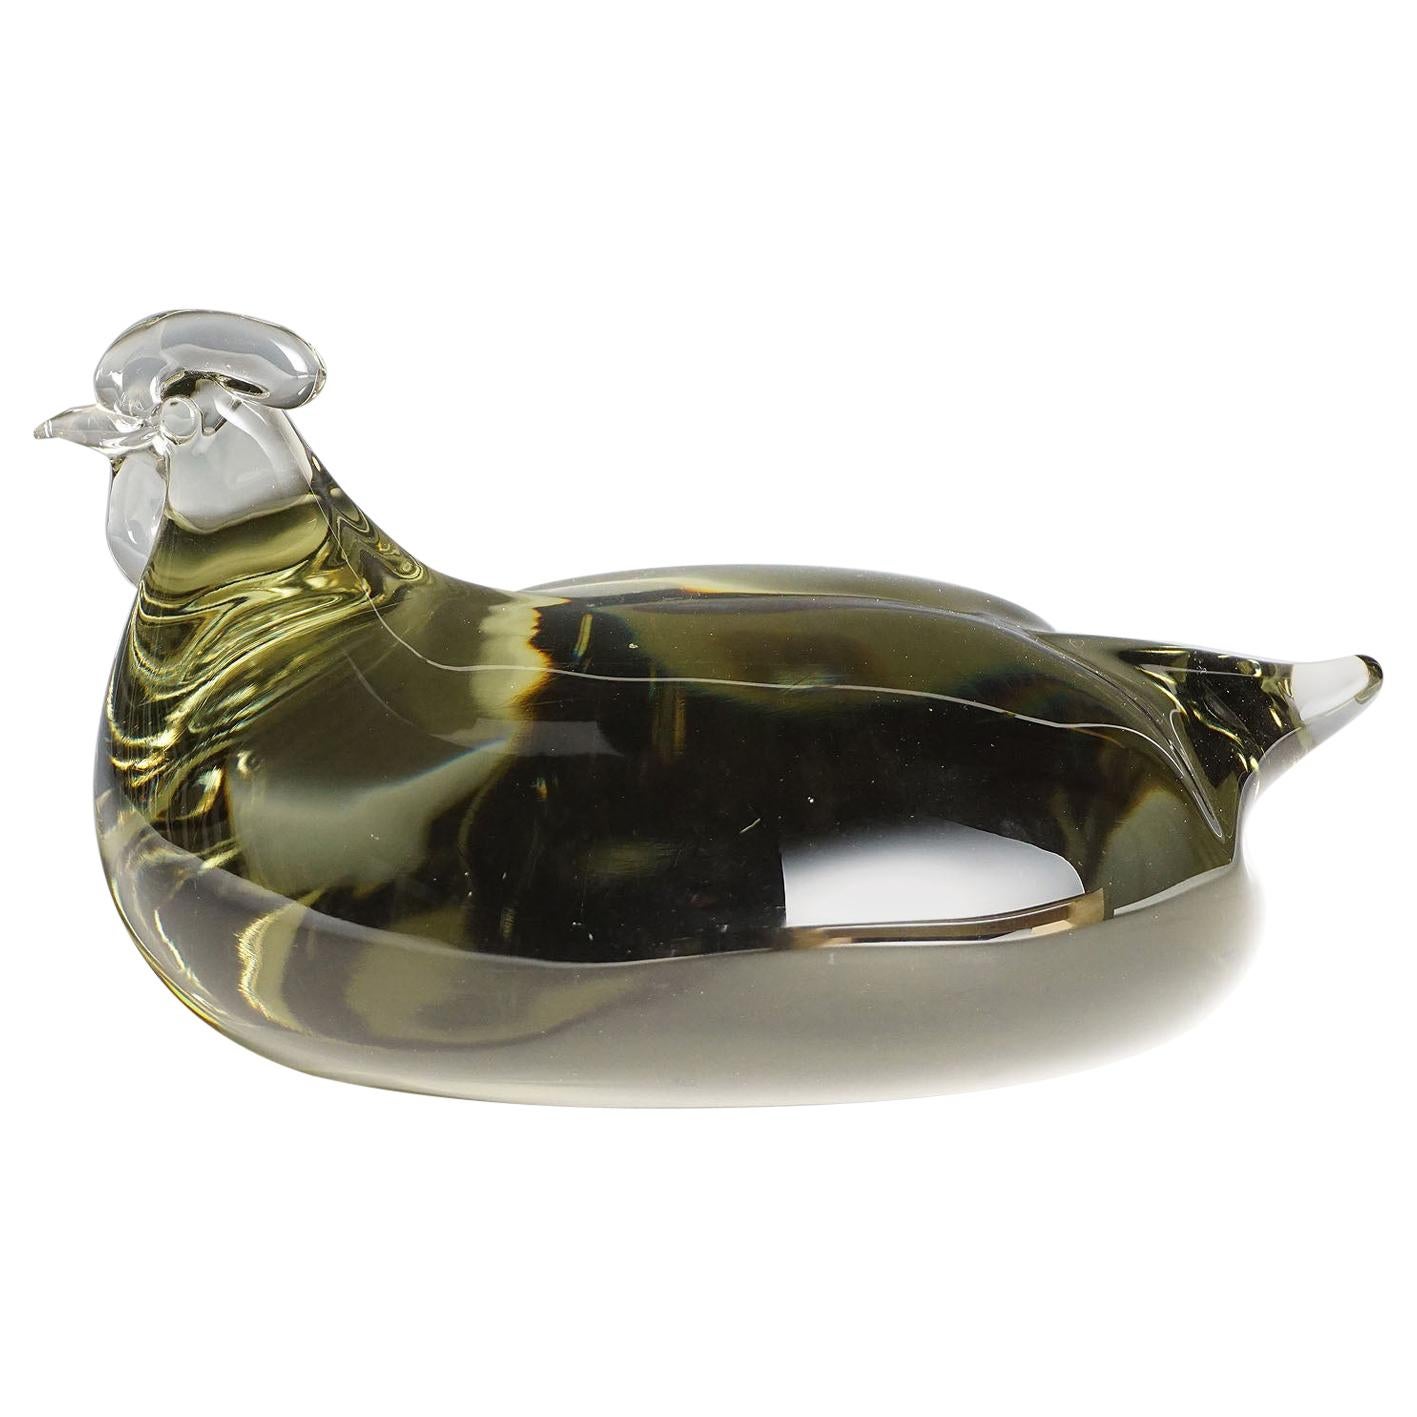 Art Glass Sculpture of a Hen by Livio Seguso for Gral, Germany, circa 1970s